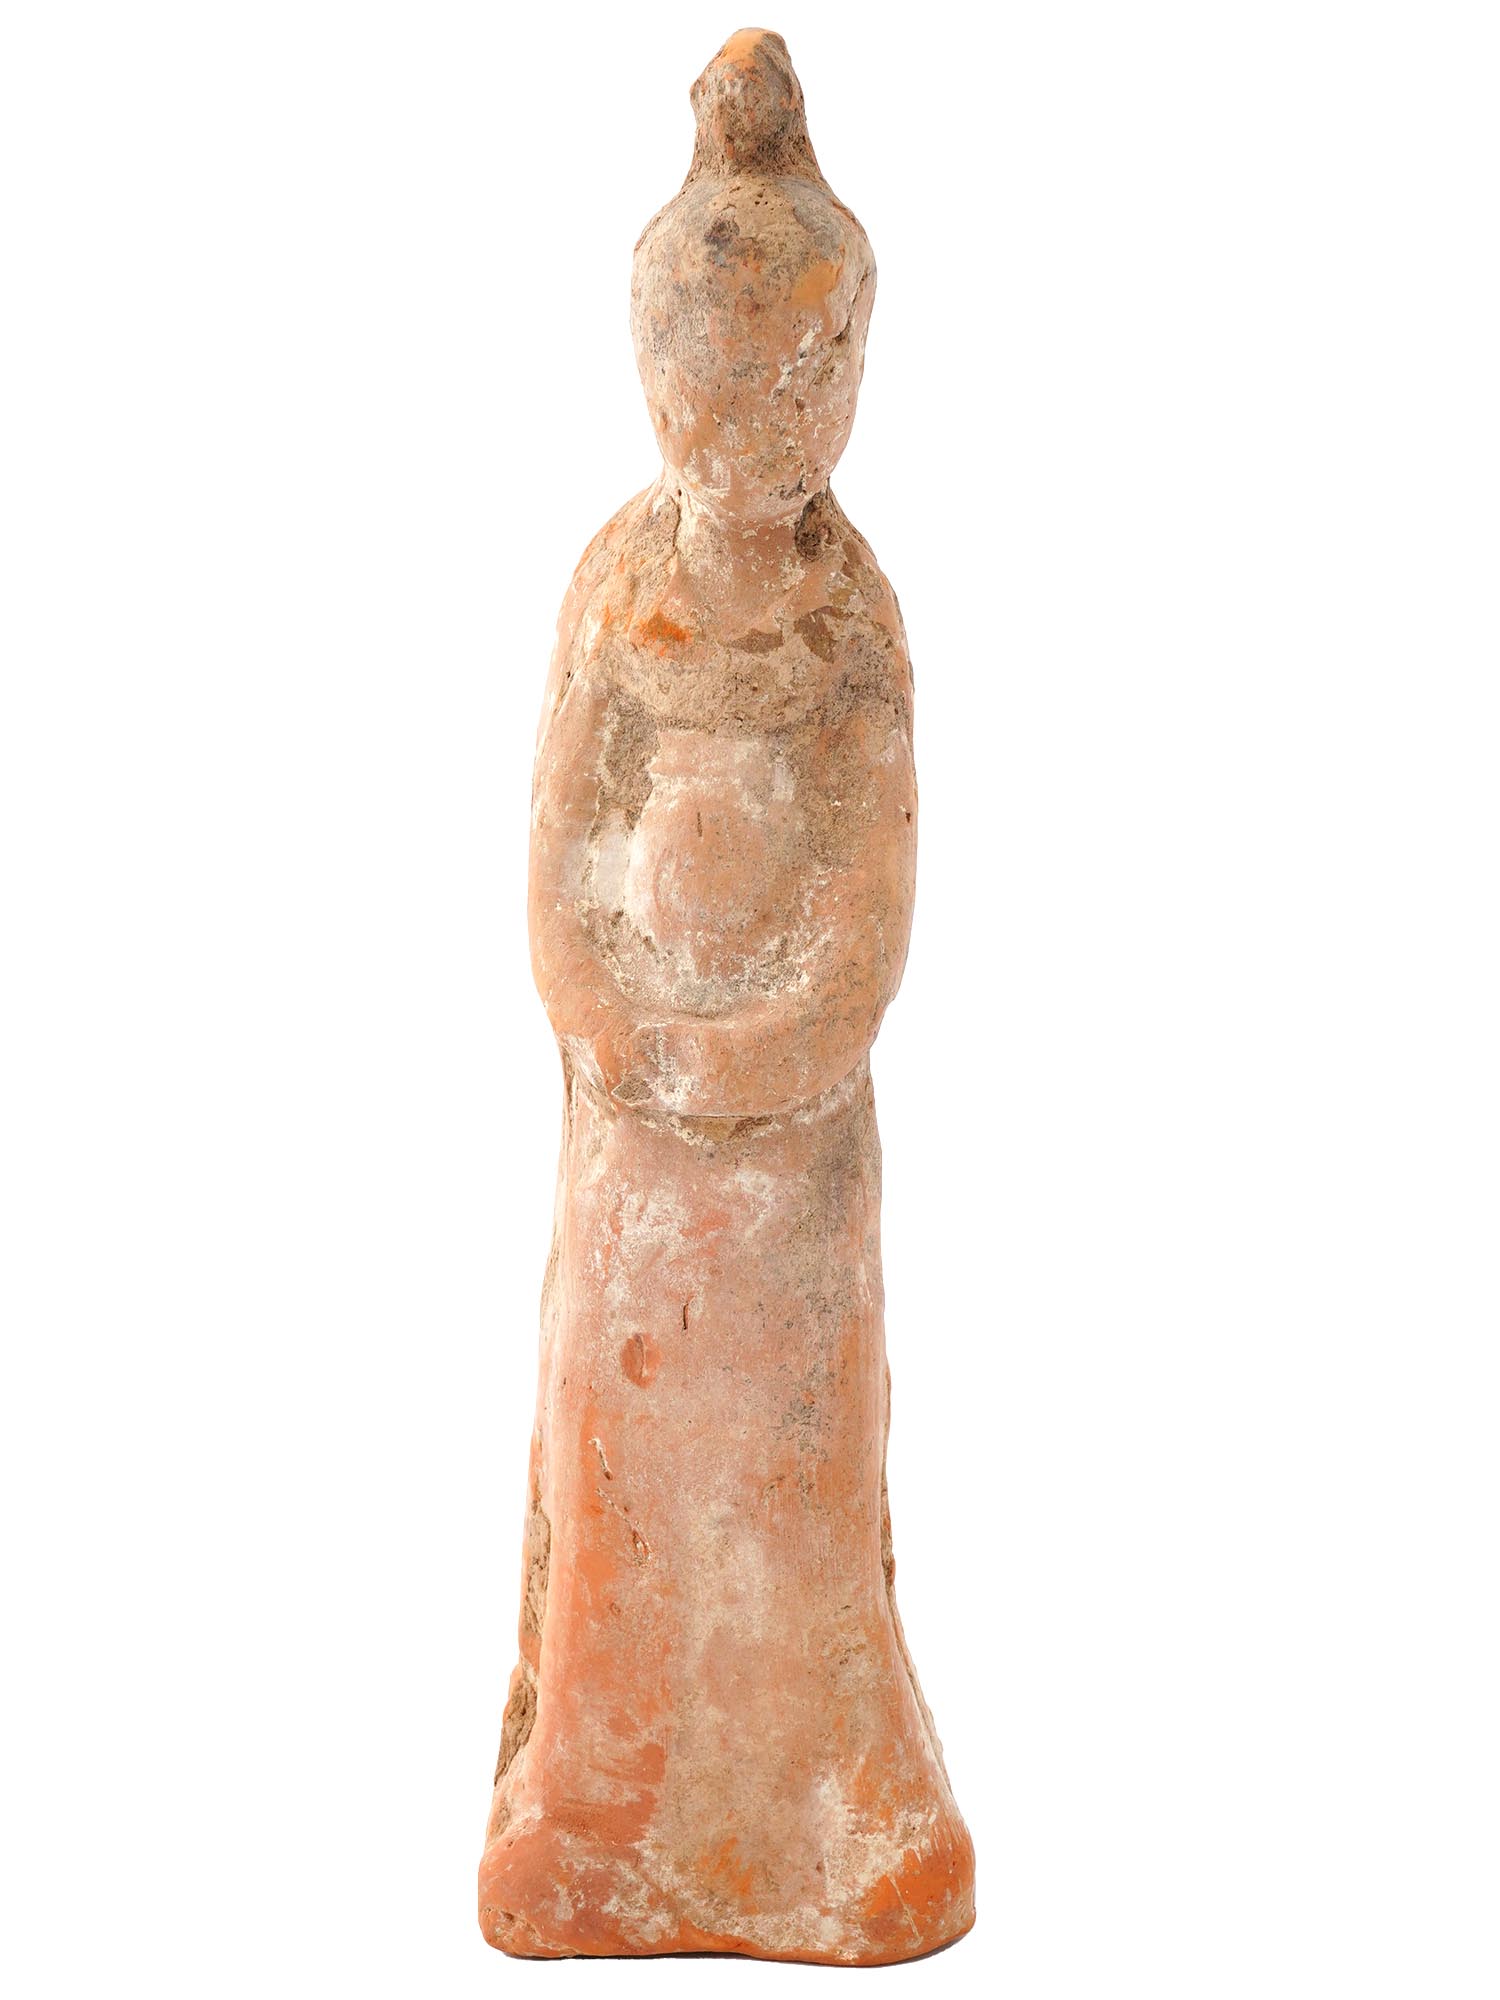 ANCIENT CHINESE HAN DYNASTY TERRACOTTA FEMALE FIGURINE PIC-1